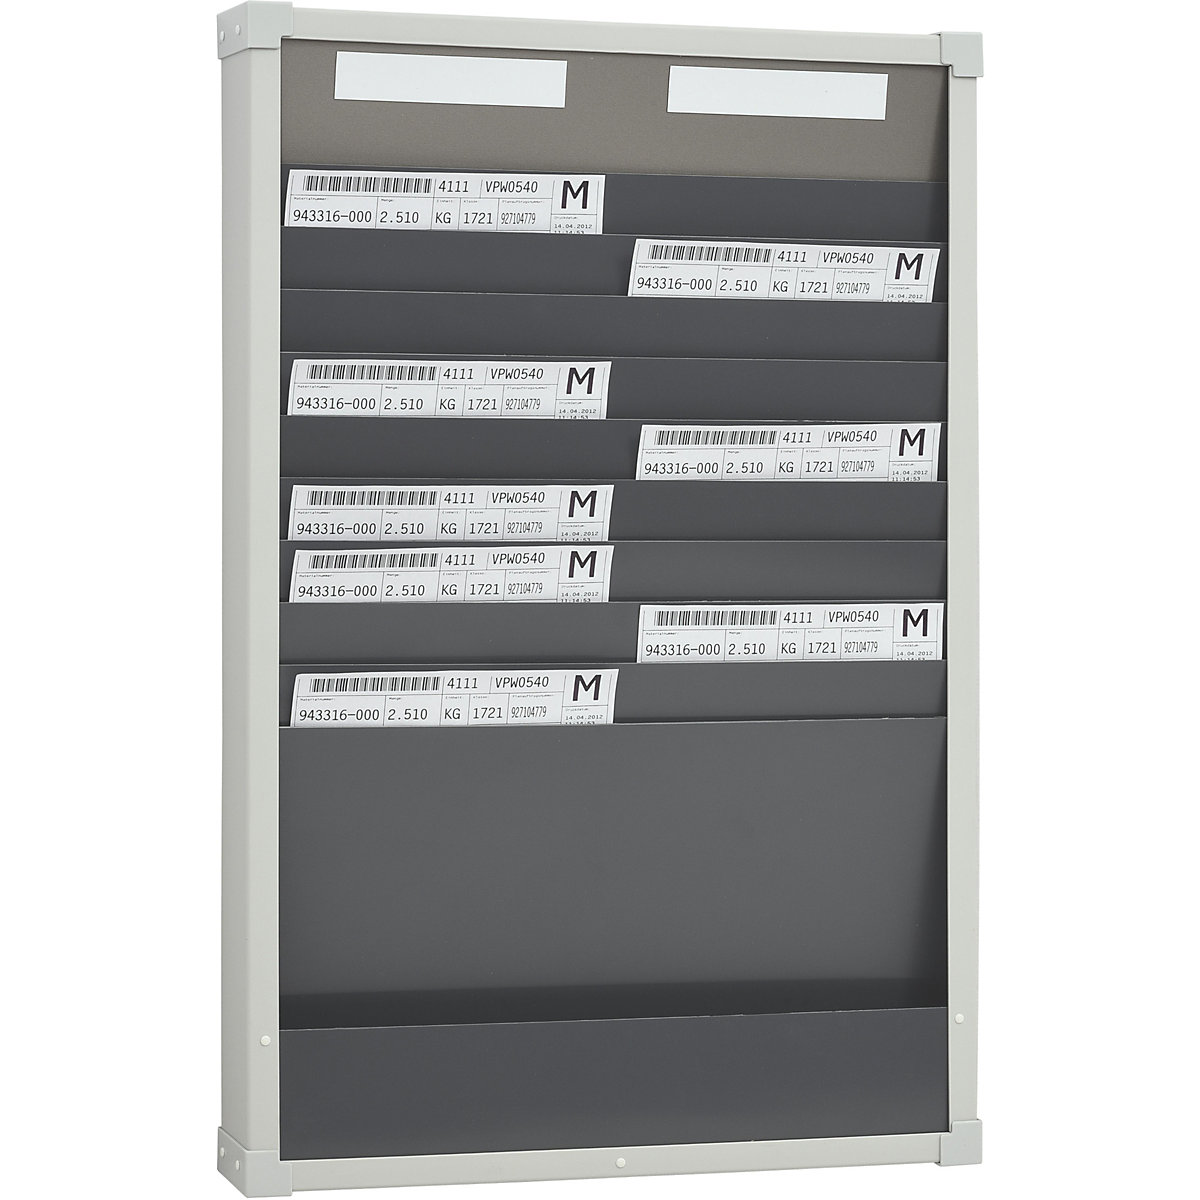 Card sorting board system – EICHNER, 10 compartments, height 750 mm, with 2 rows-8